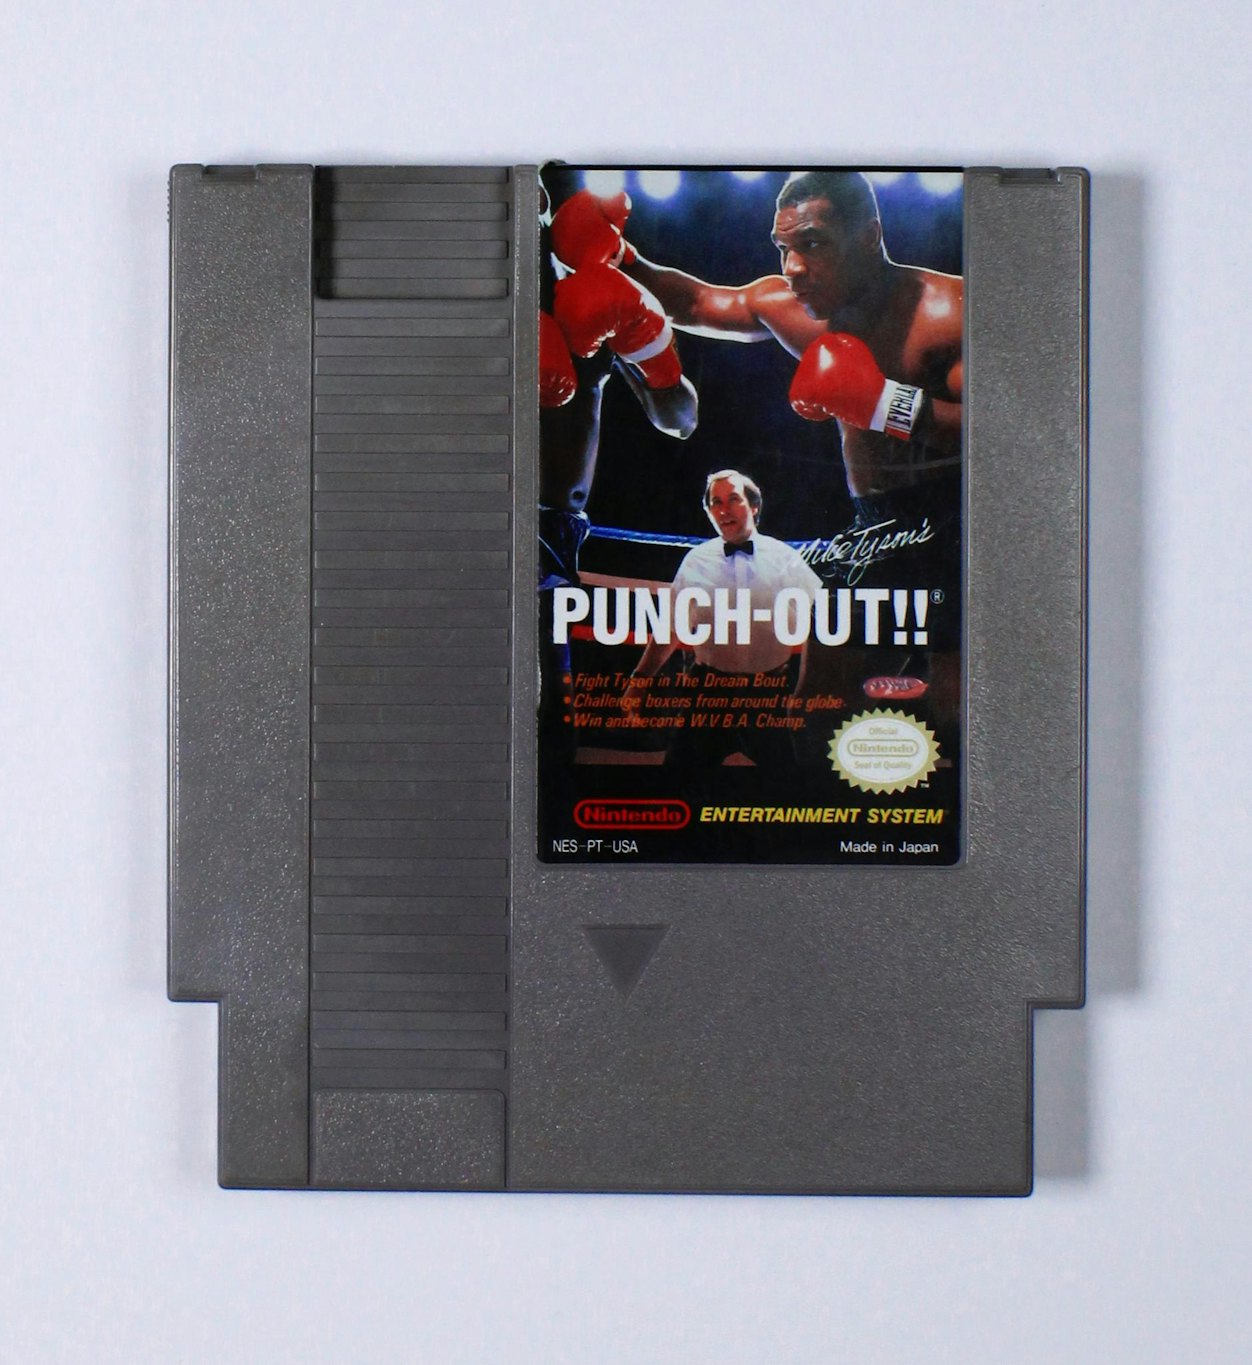 Mike Tyson’s Punch-Out!!